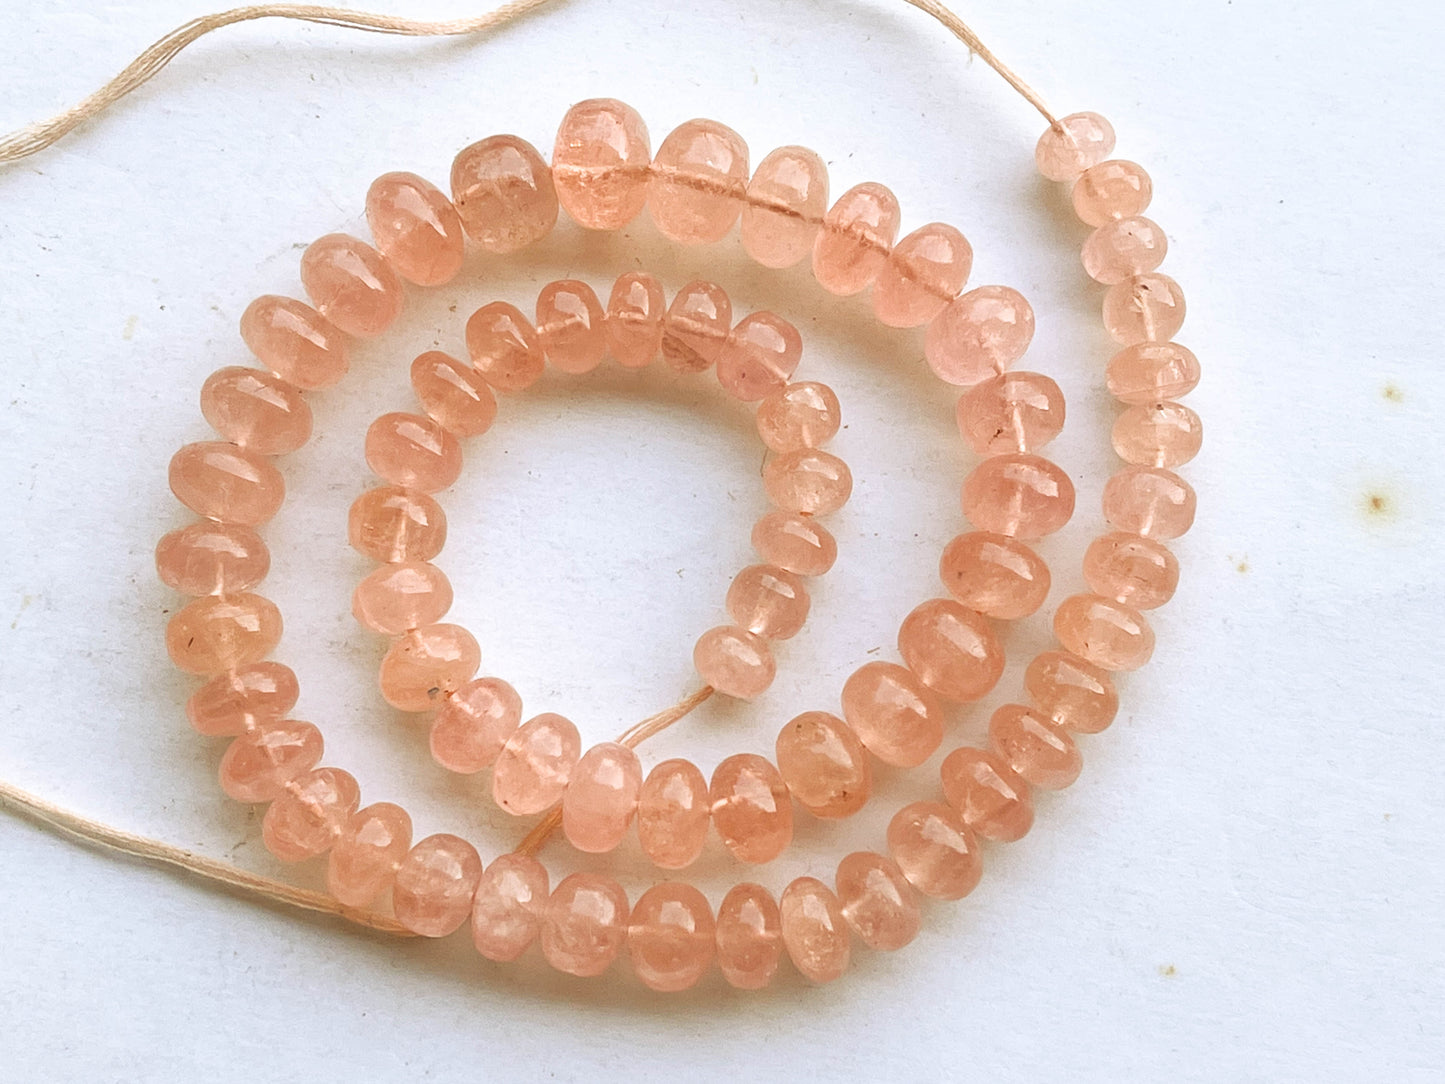 16 Inch Peach Morganite Smooth Rondelle Beads Beadsforyourjewelry